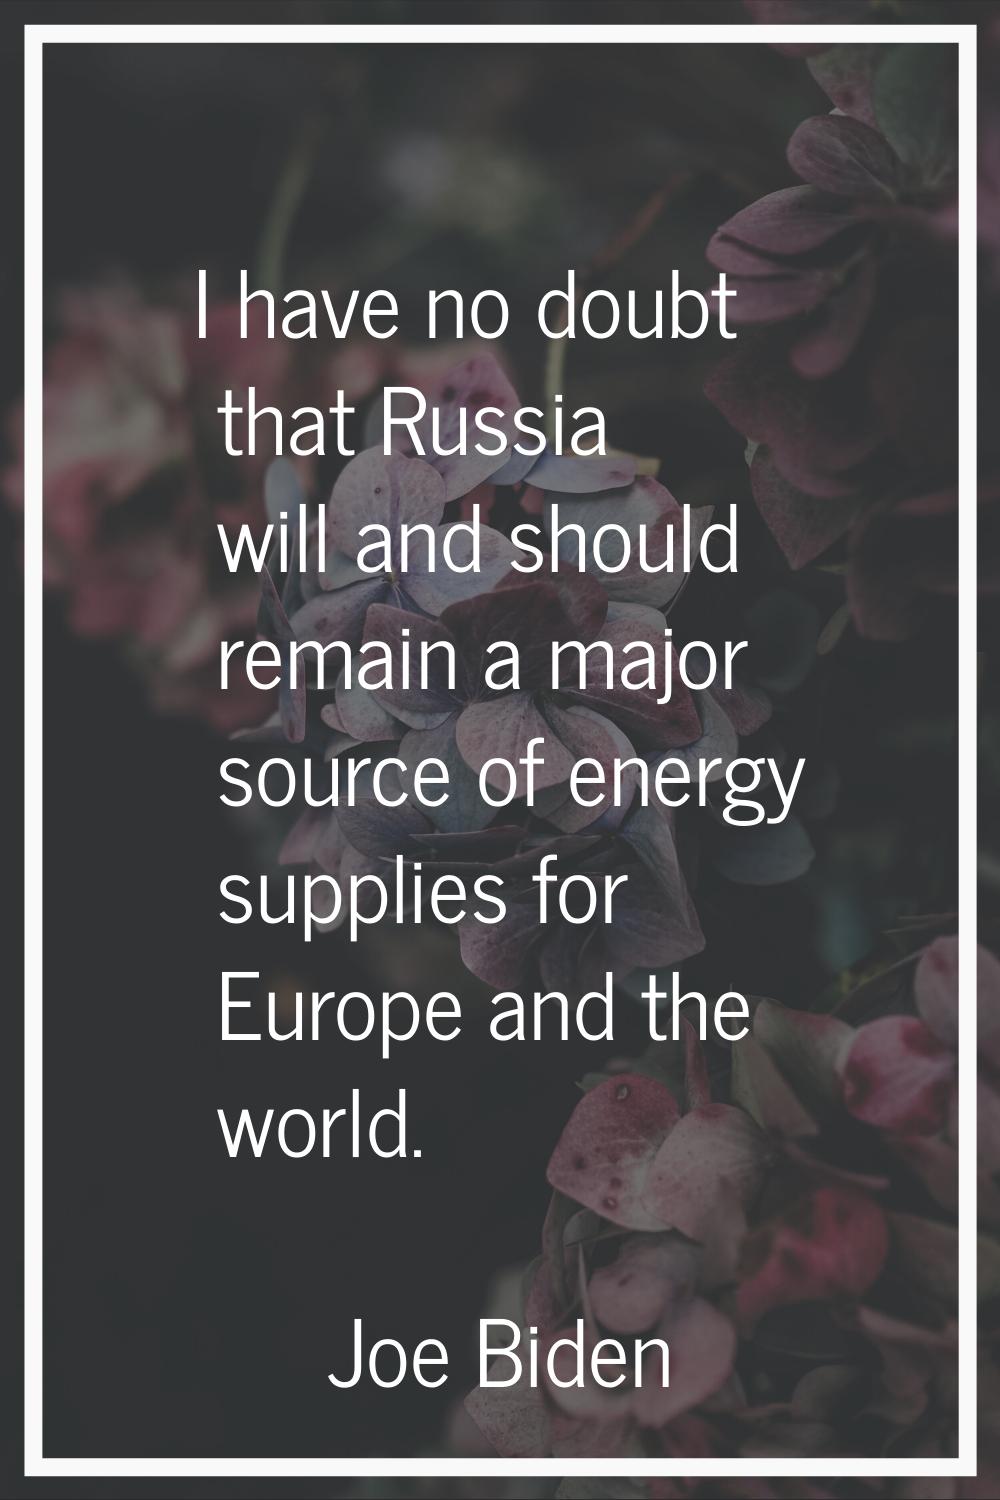 I have no doubt that Russia will and should remain a major source of energy supplies for Europe and